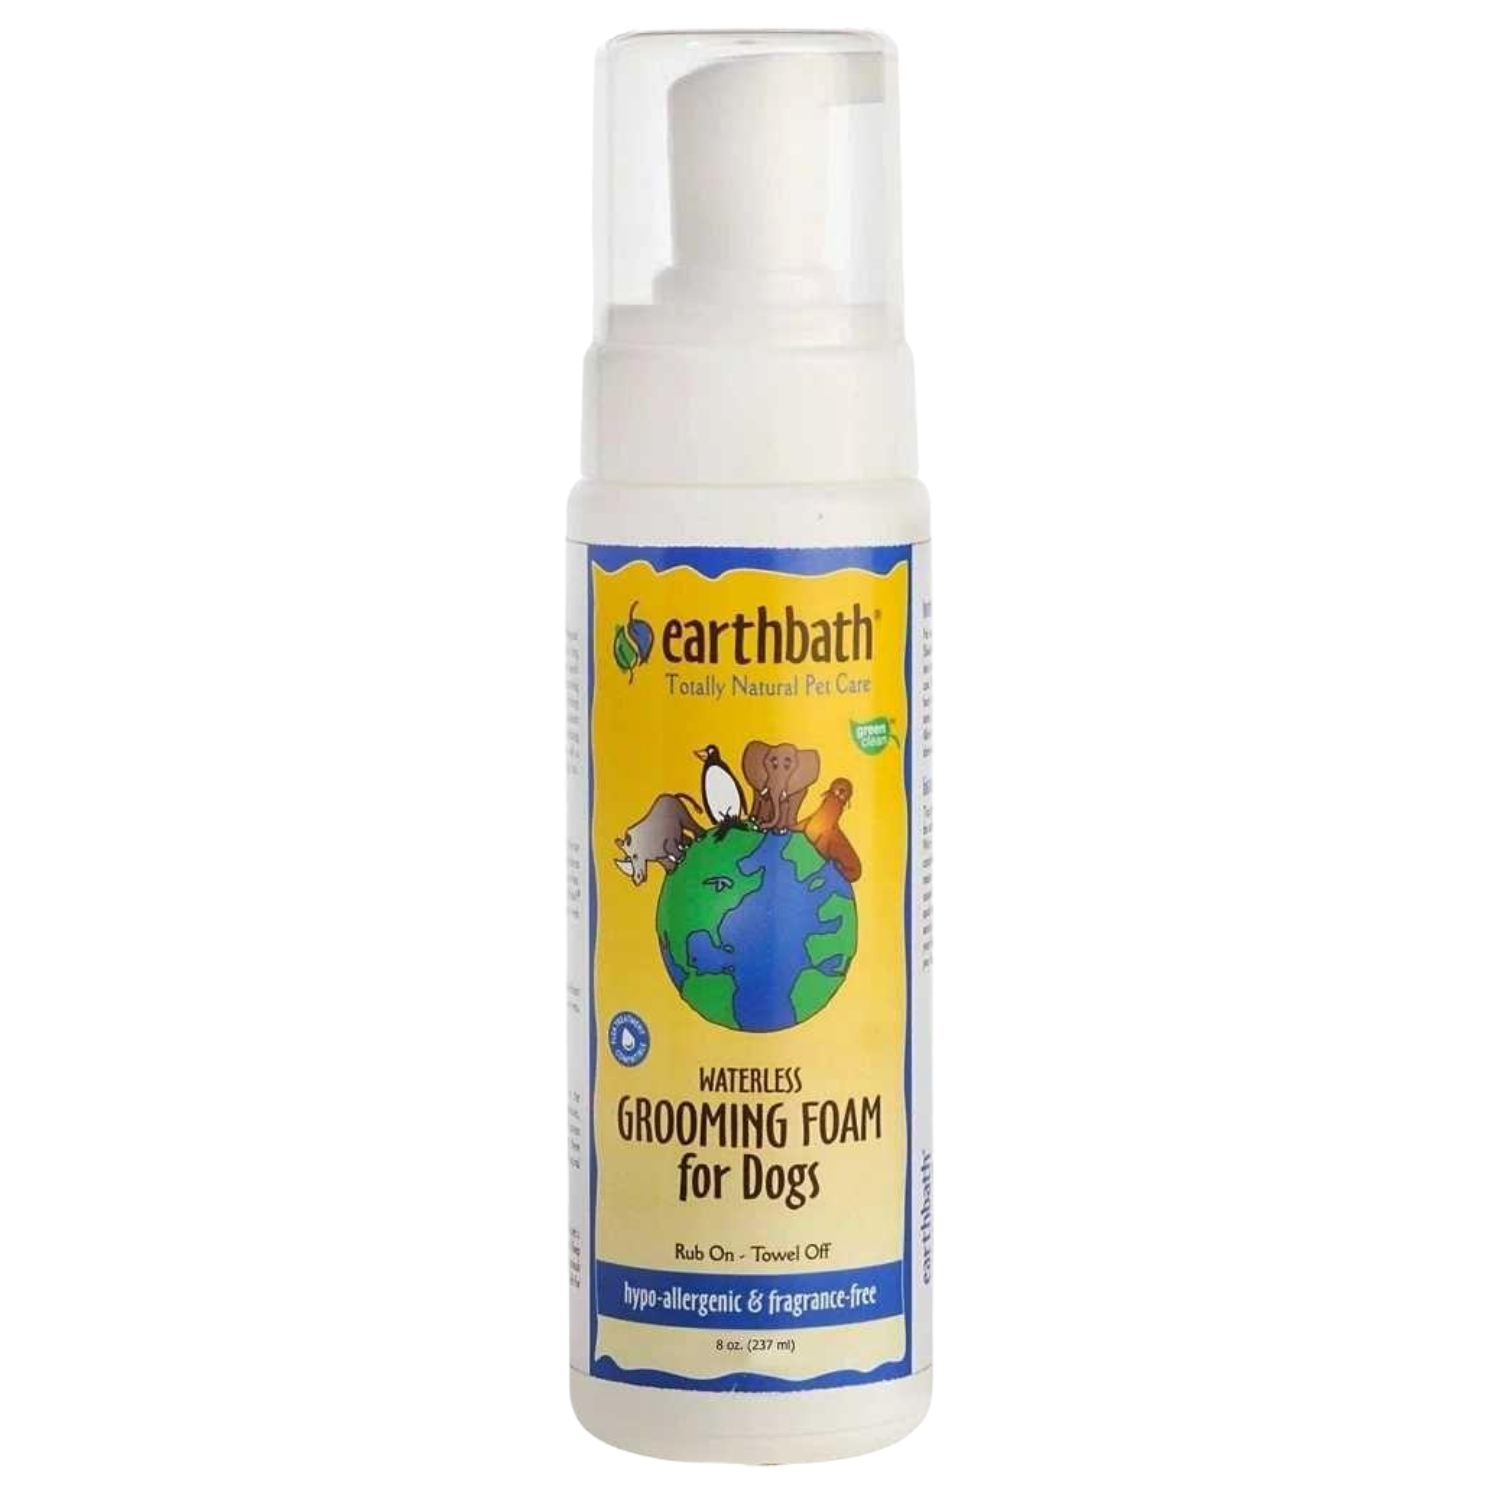 Earthbath Hypo-Allergenic Grooming Foam for Dogs (Fragrance Free) - 237ml